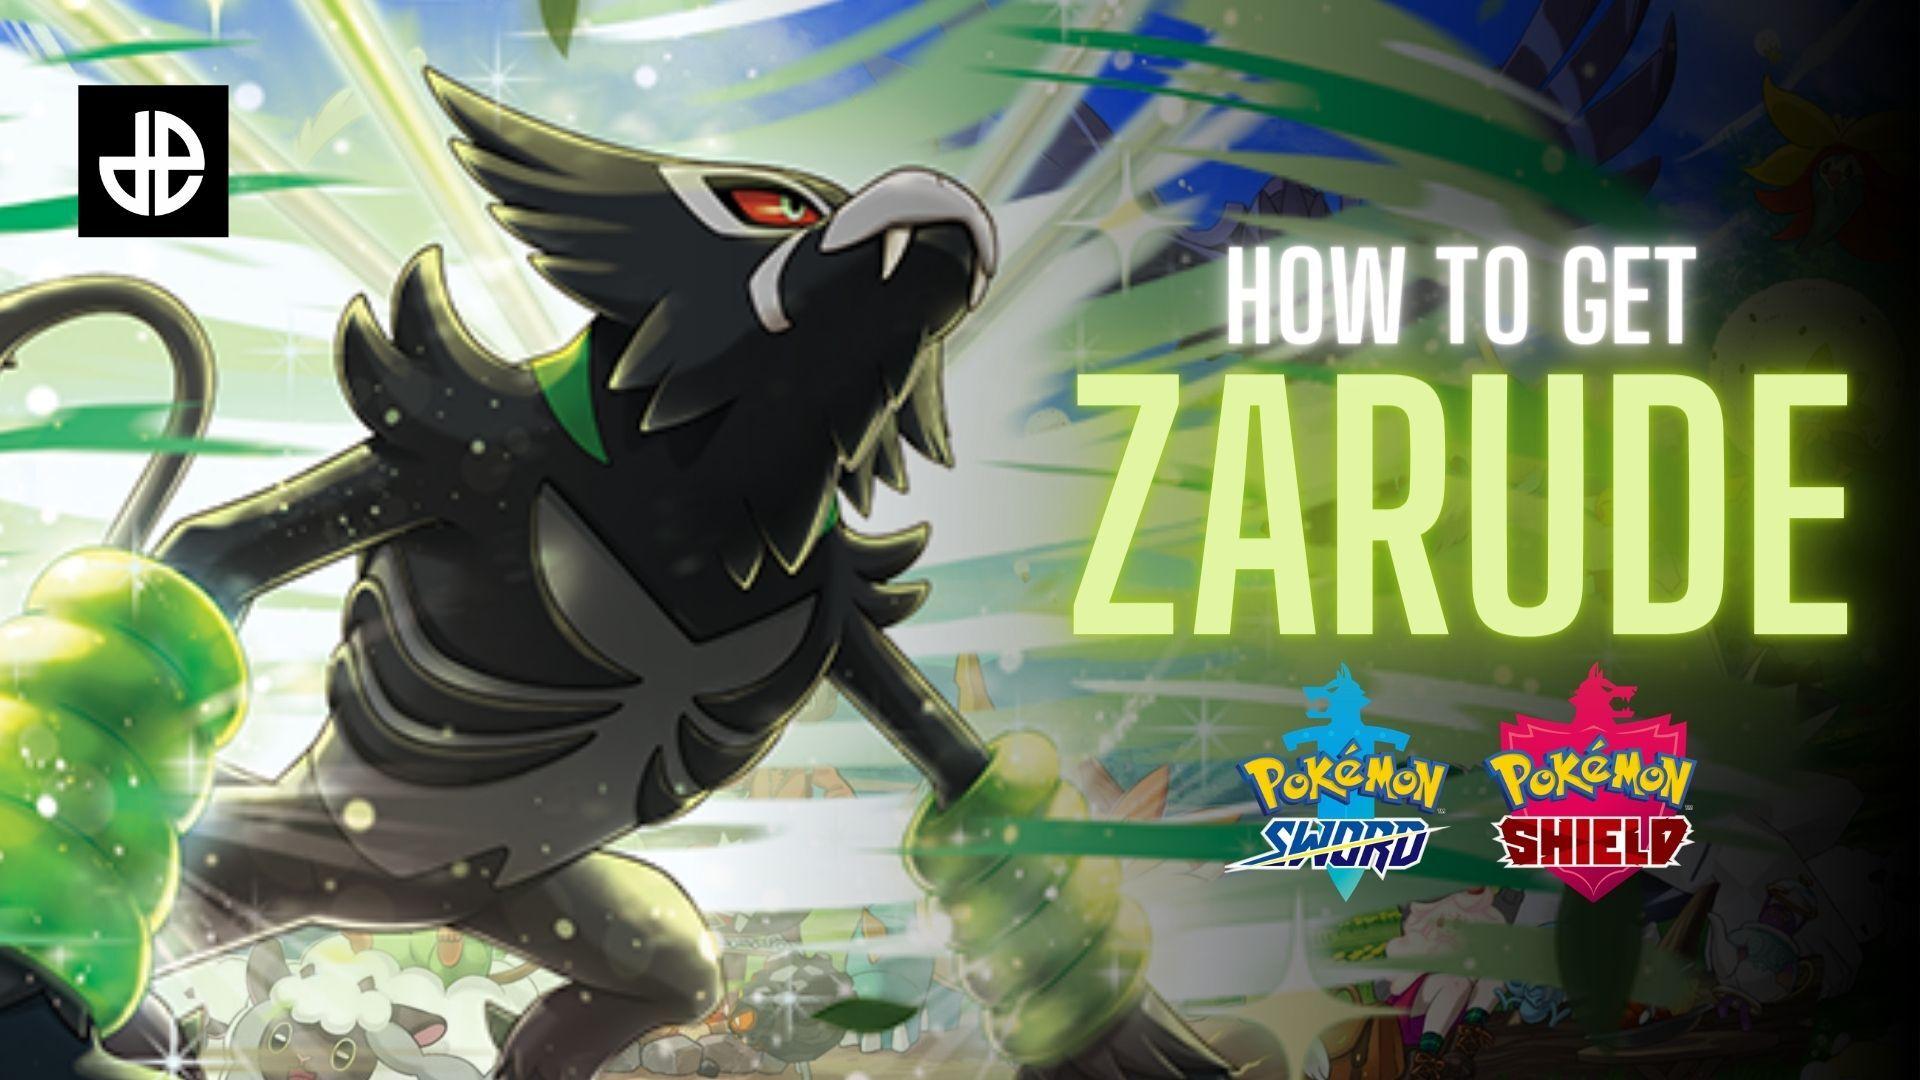 Zarude Arrives In Pokémon GO This Week, Here's How To Get One